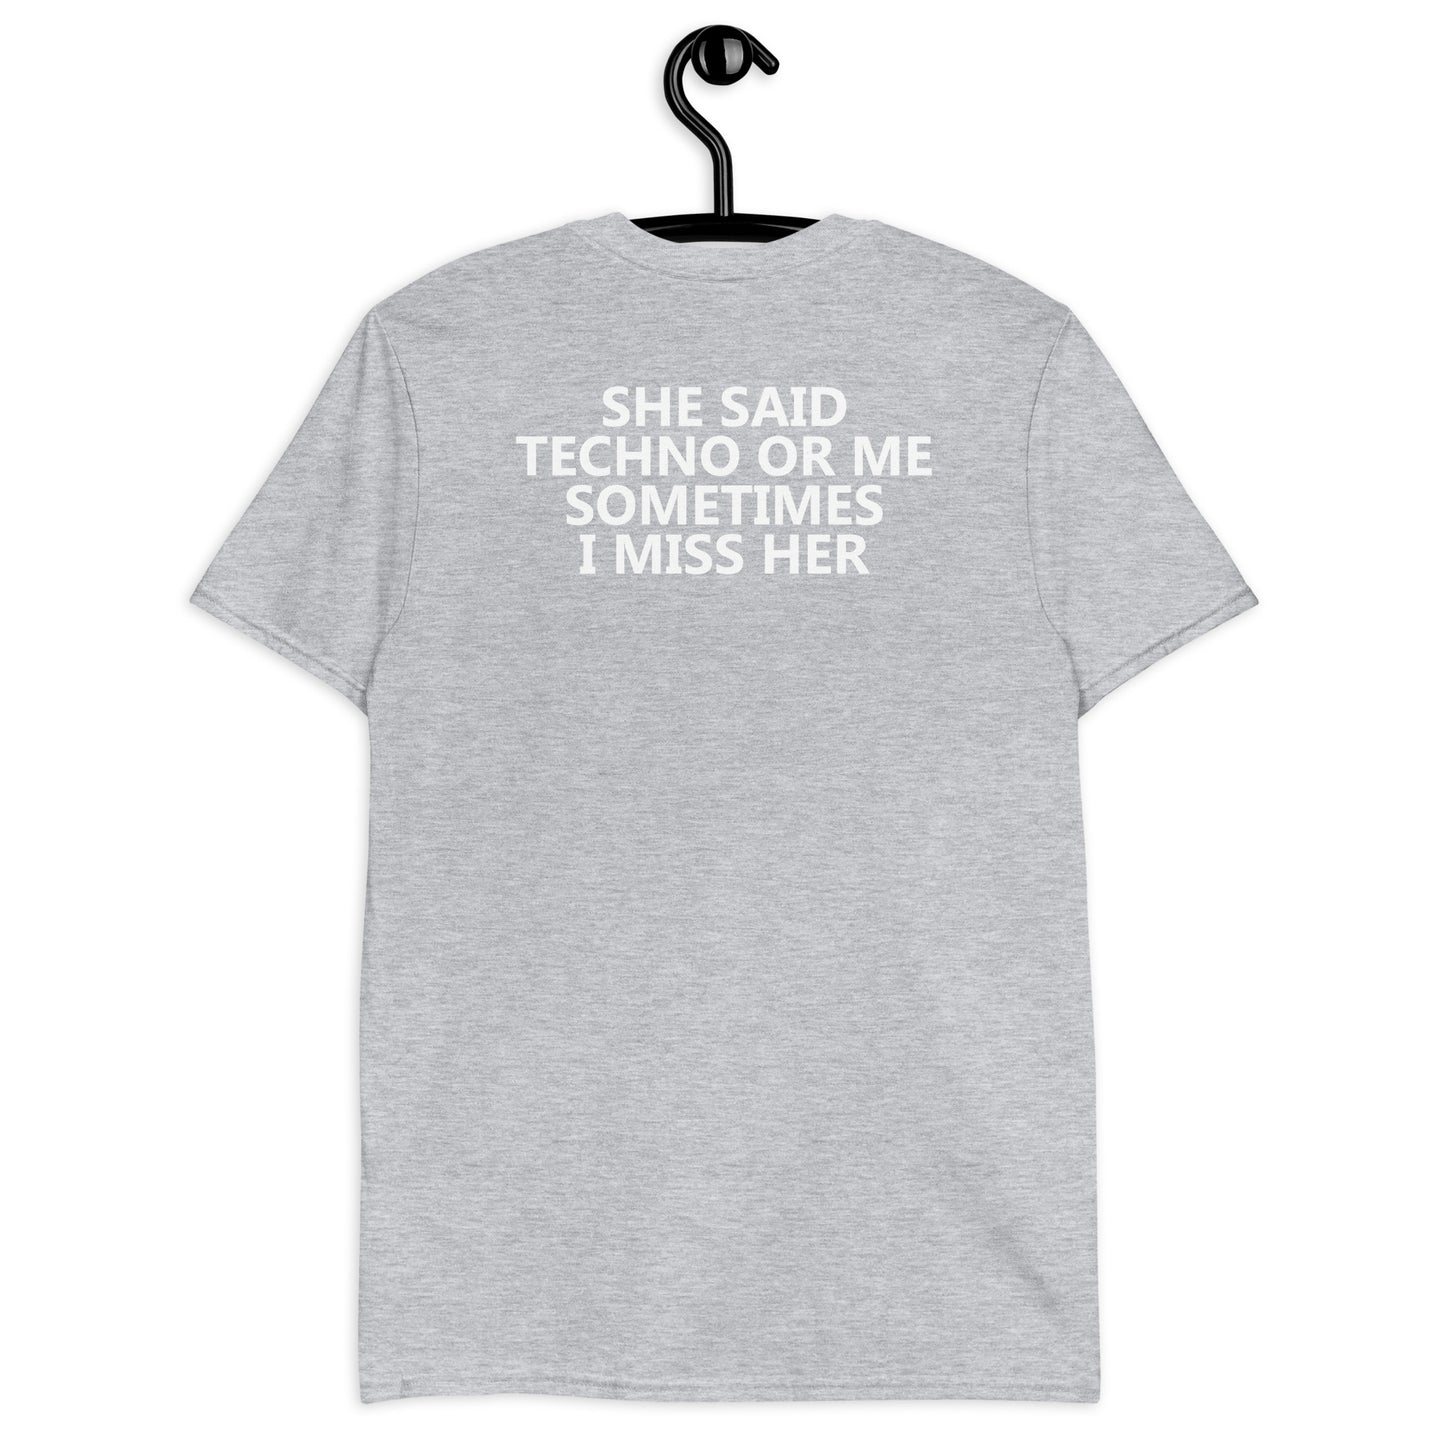 SHE SAID TECHNO OR ME SOMETIMES I MISS HER Short-Sleeve Unisex T-Shirt